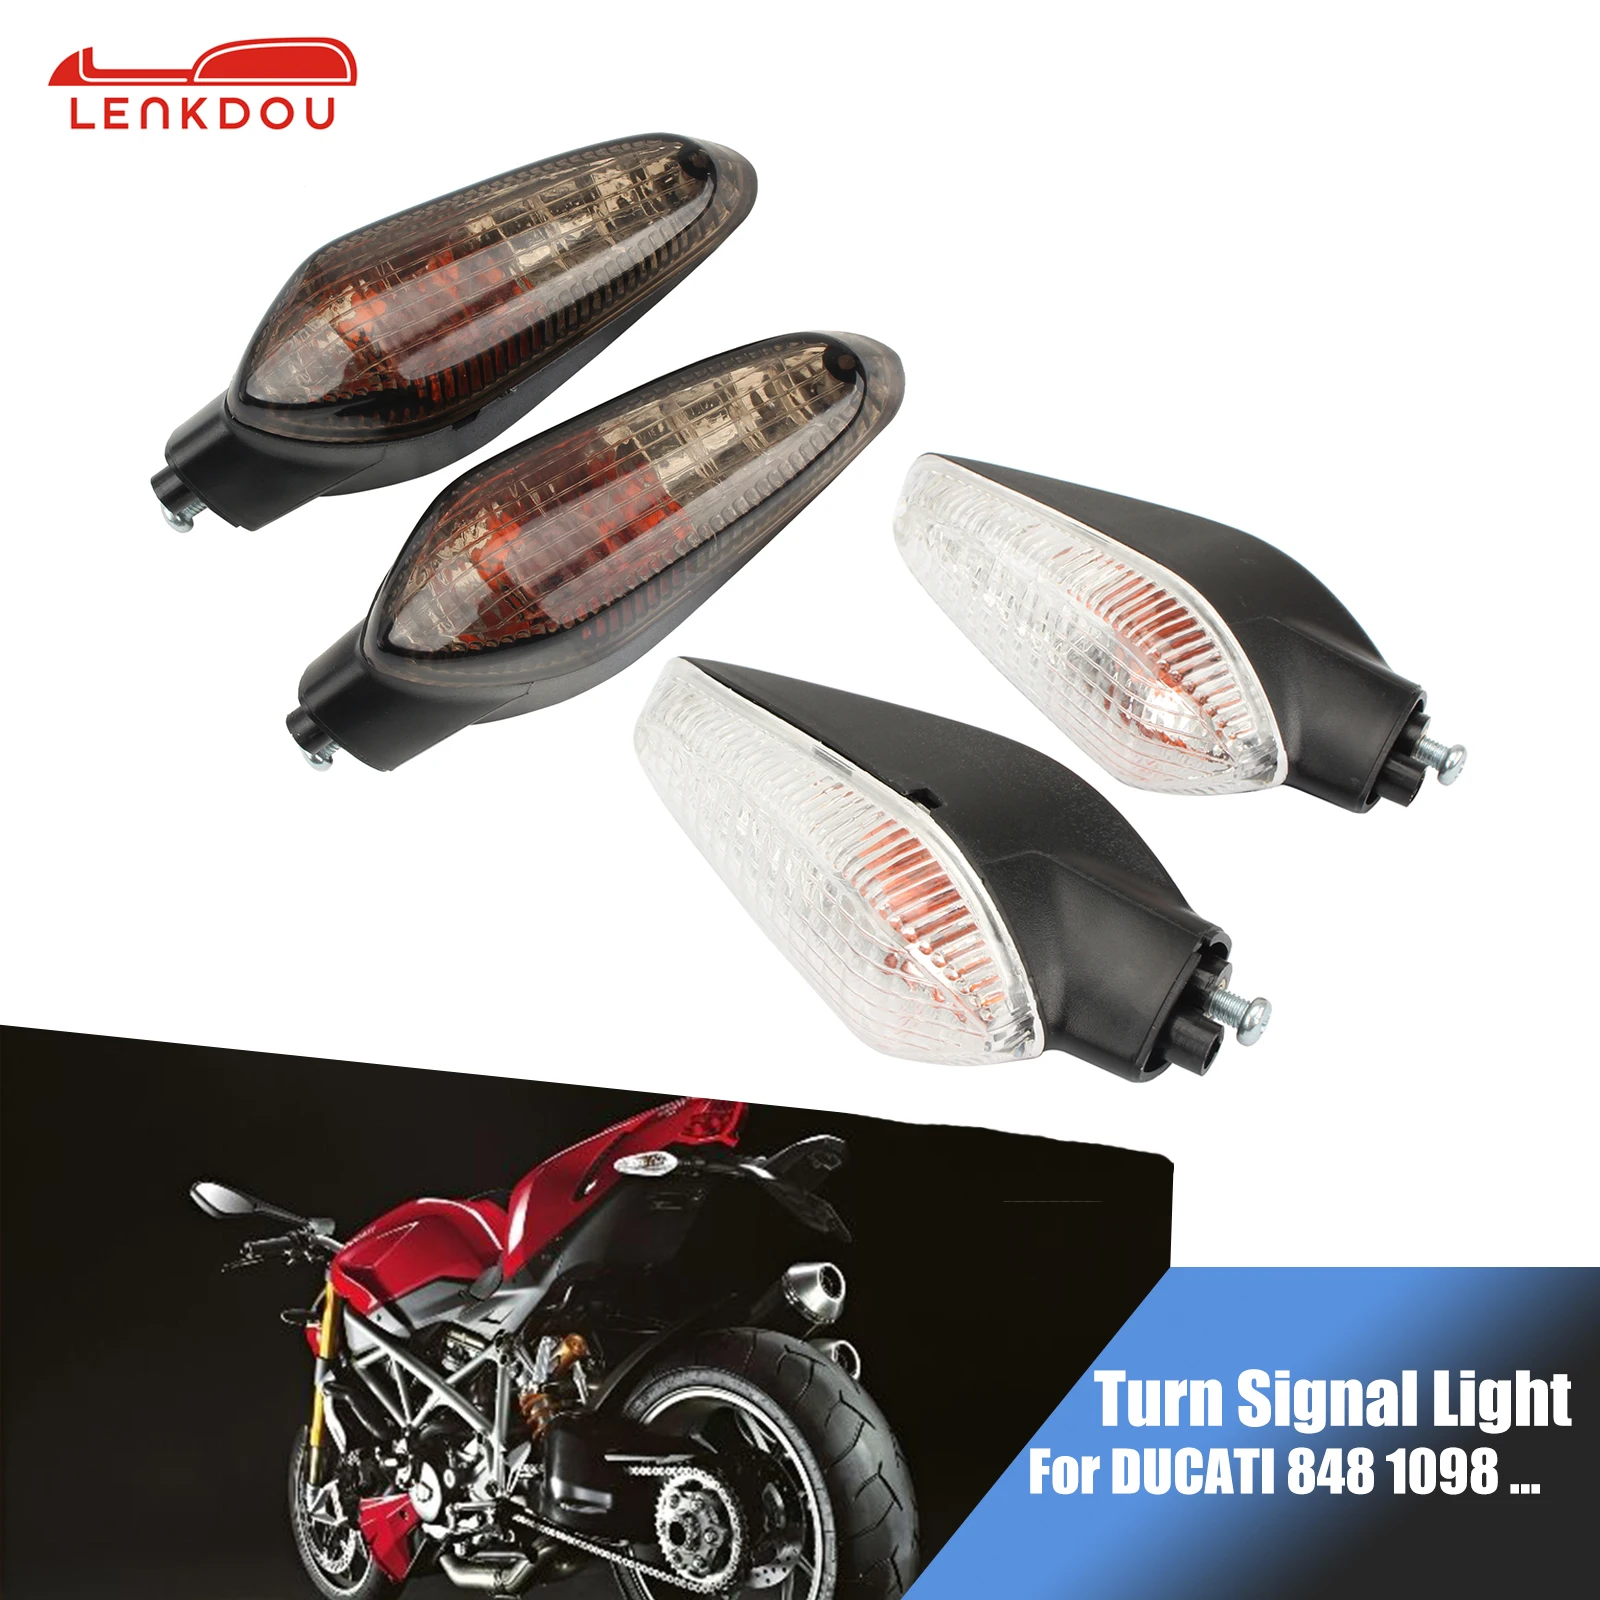 

Rear Turn Signal Indicator Light For DUCATI 848 EVO 1098 1198 S R Panigale 899 959 V2 1199 1299 Motorcycle Accessories Blinker